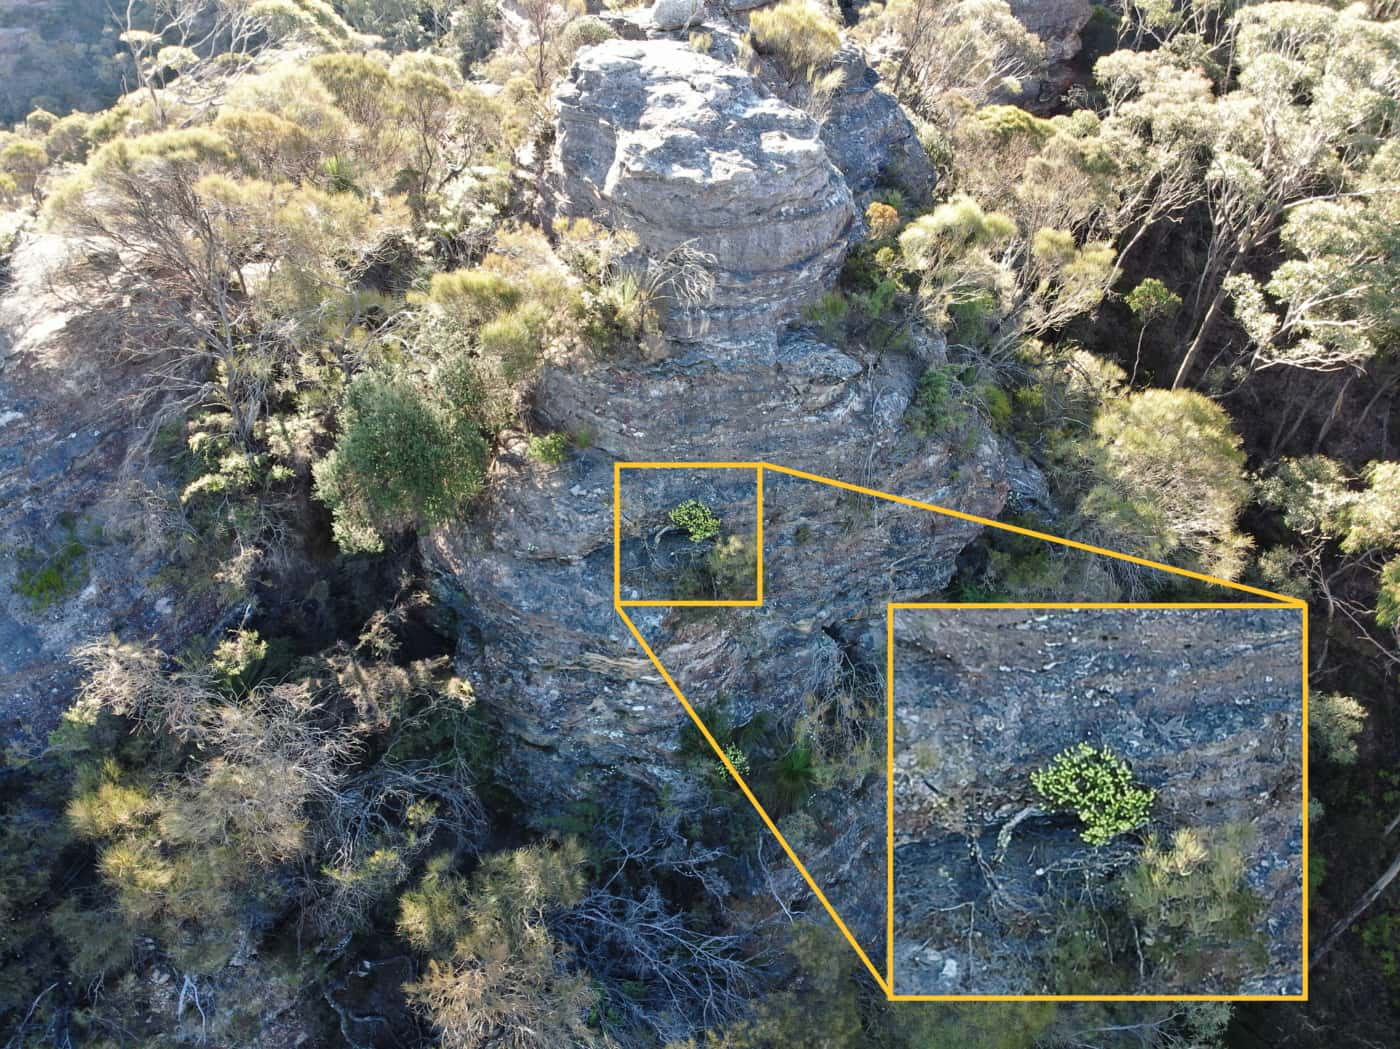 High resolution images were captured by drones during the rare plant survey